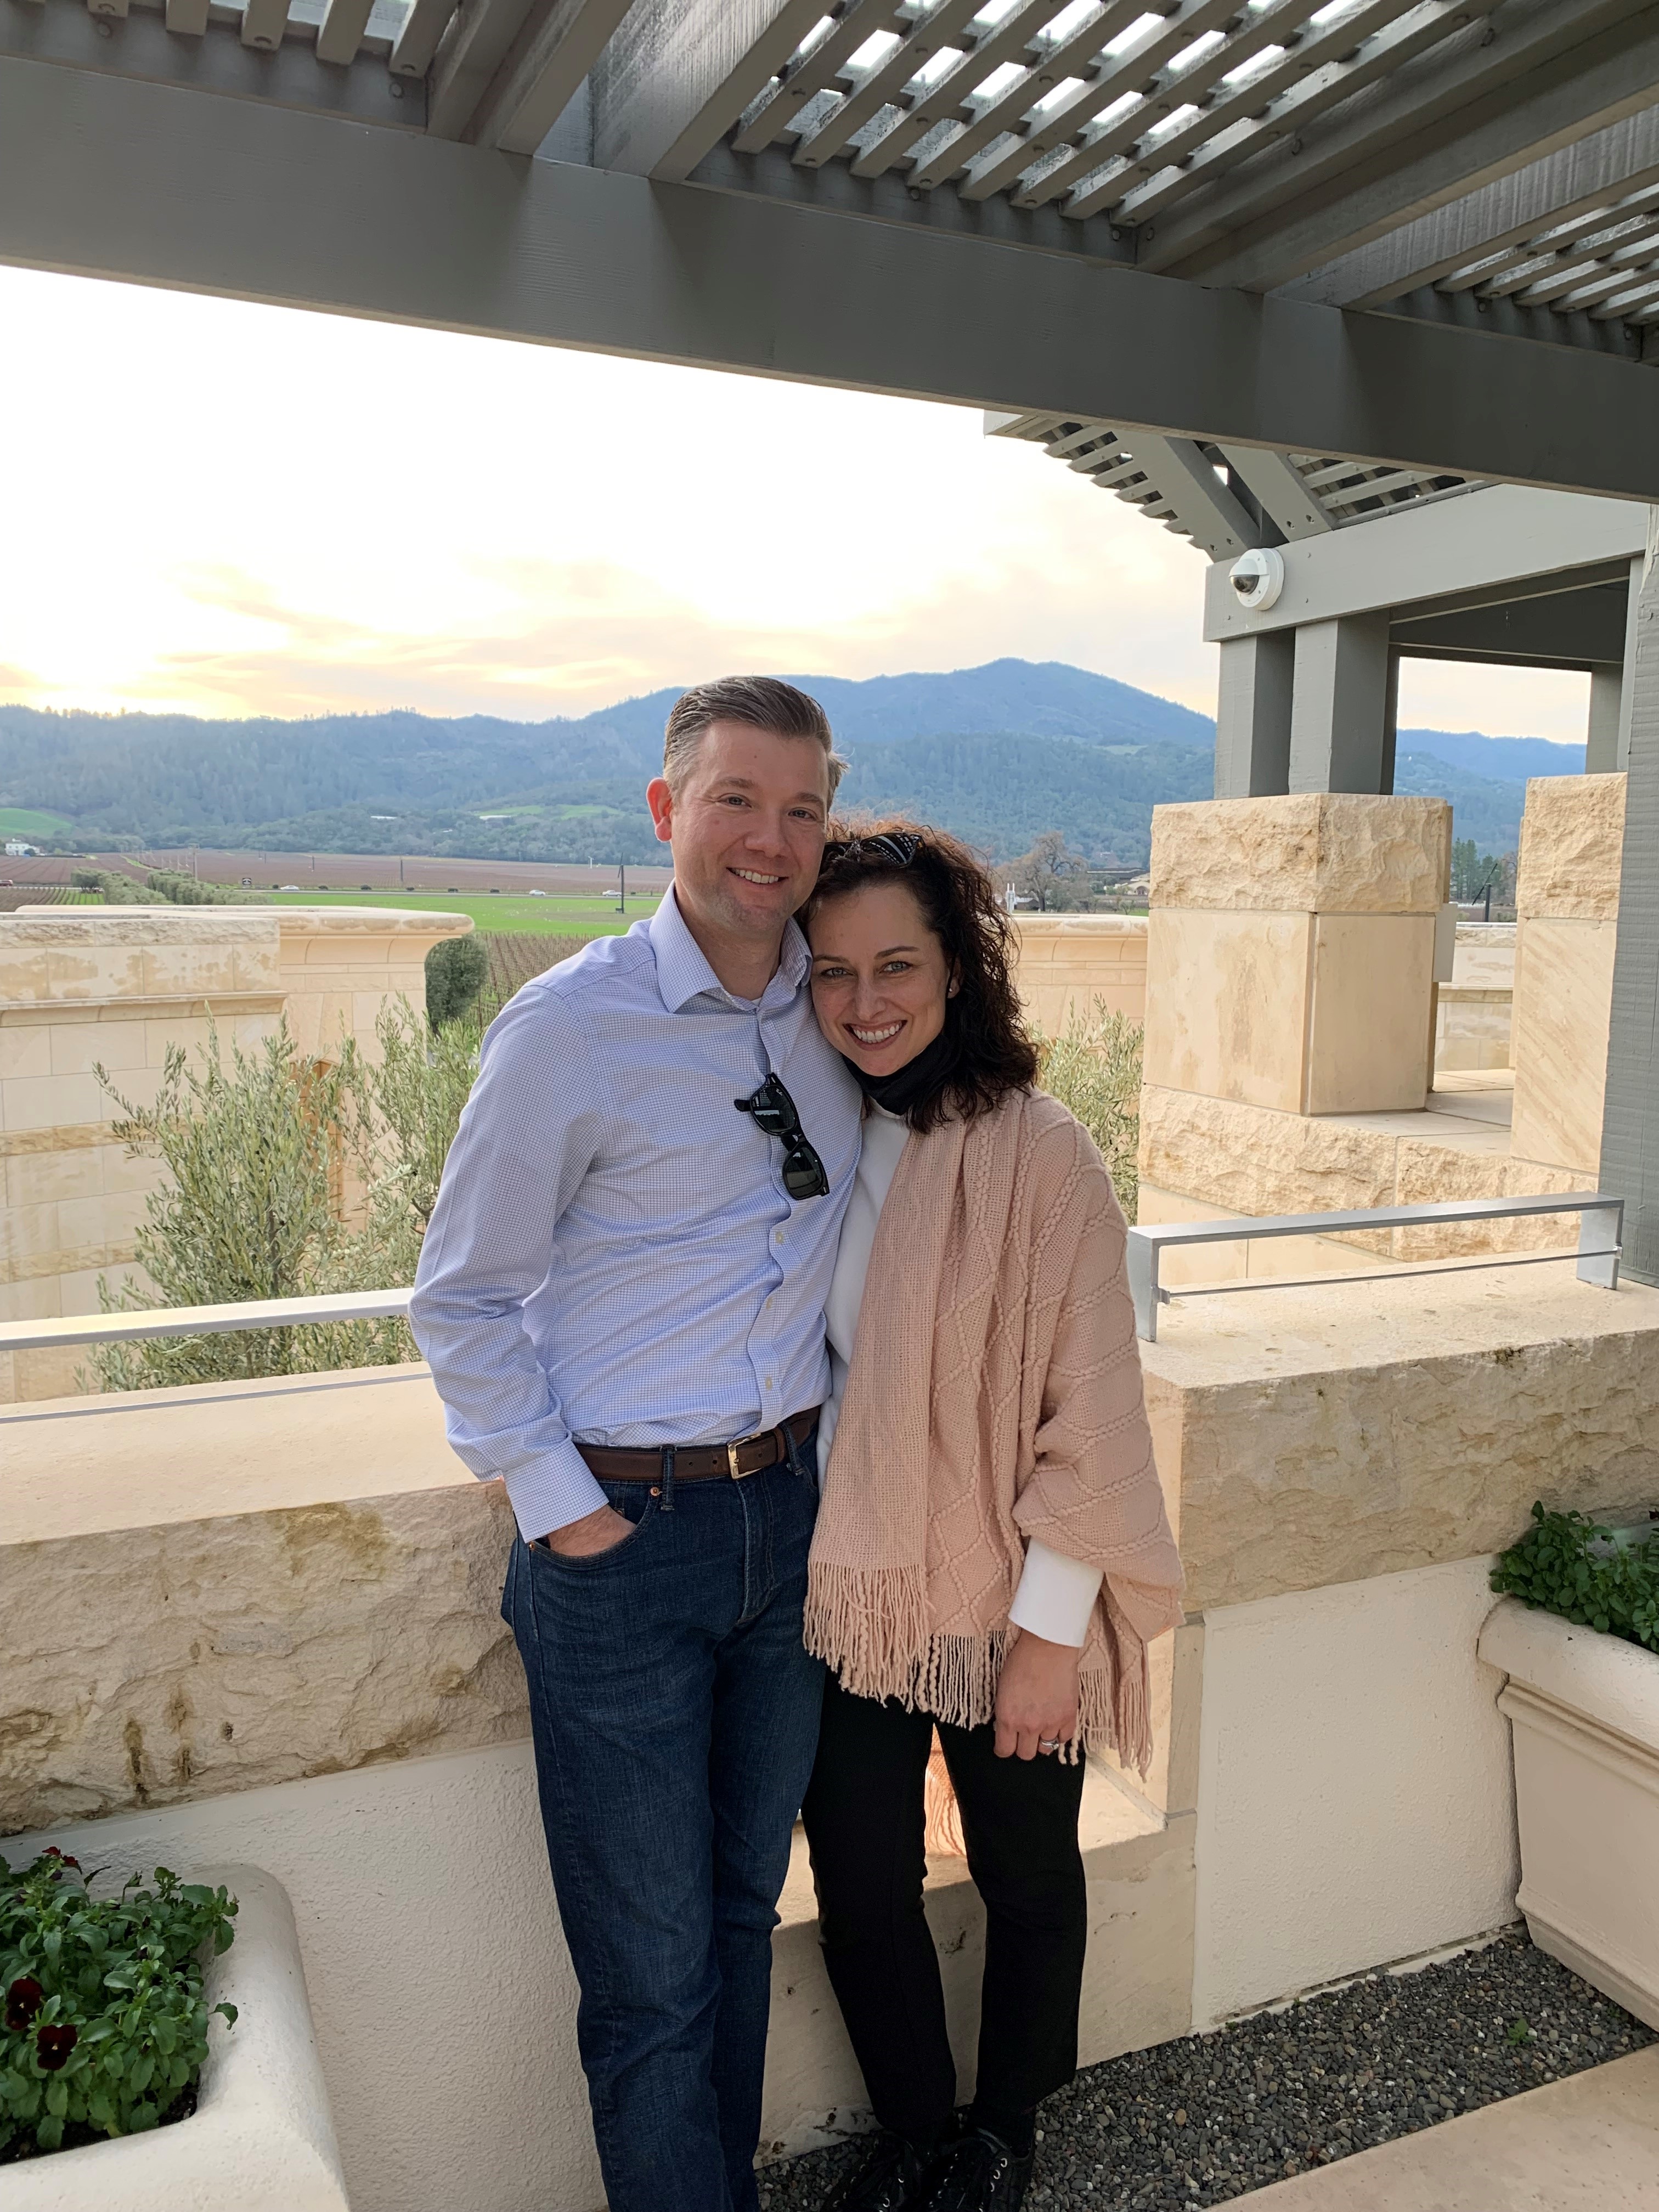 2023 May 08 - Weekly Member Feature - Jason Murrie - Murrie and Katherine in Napa Valley